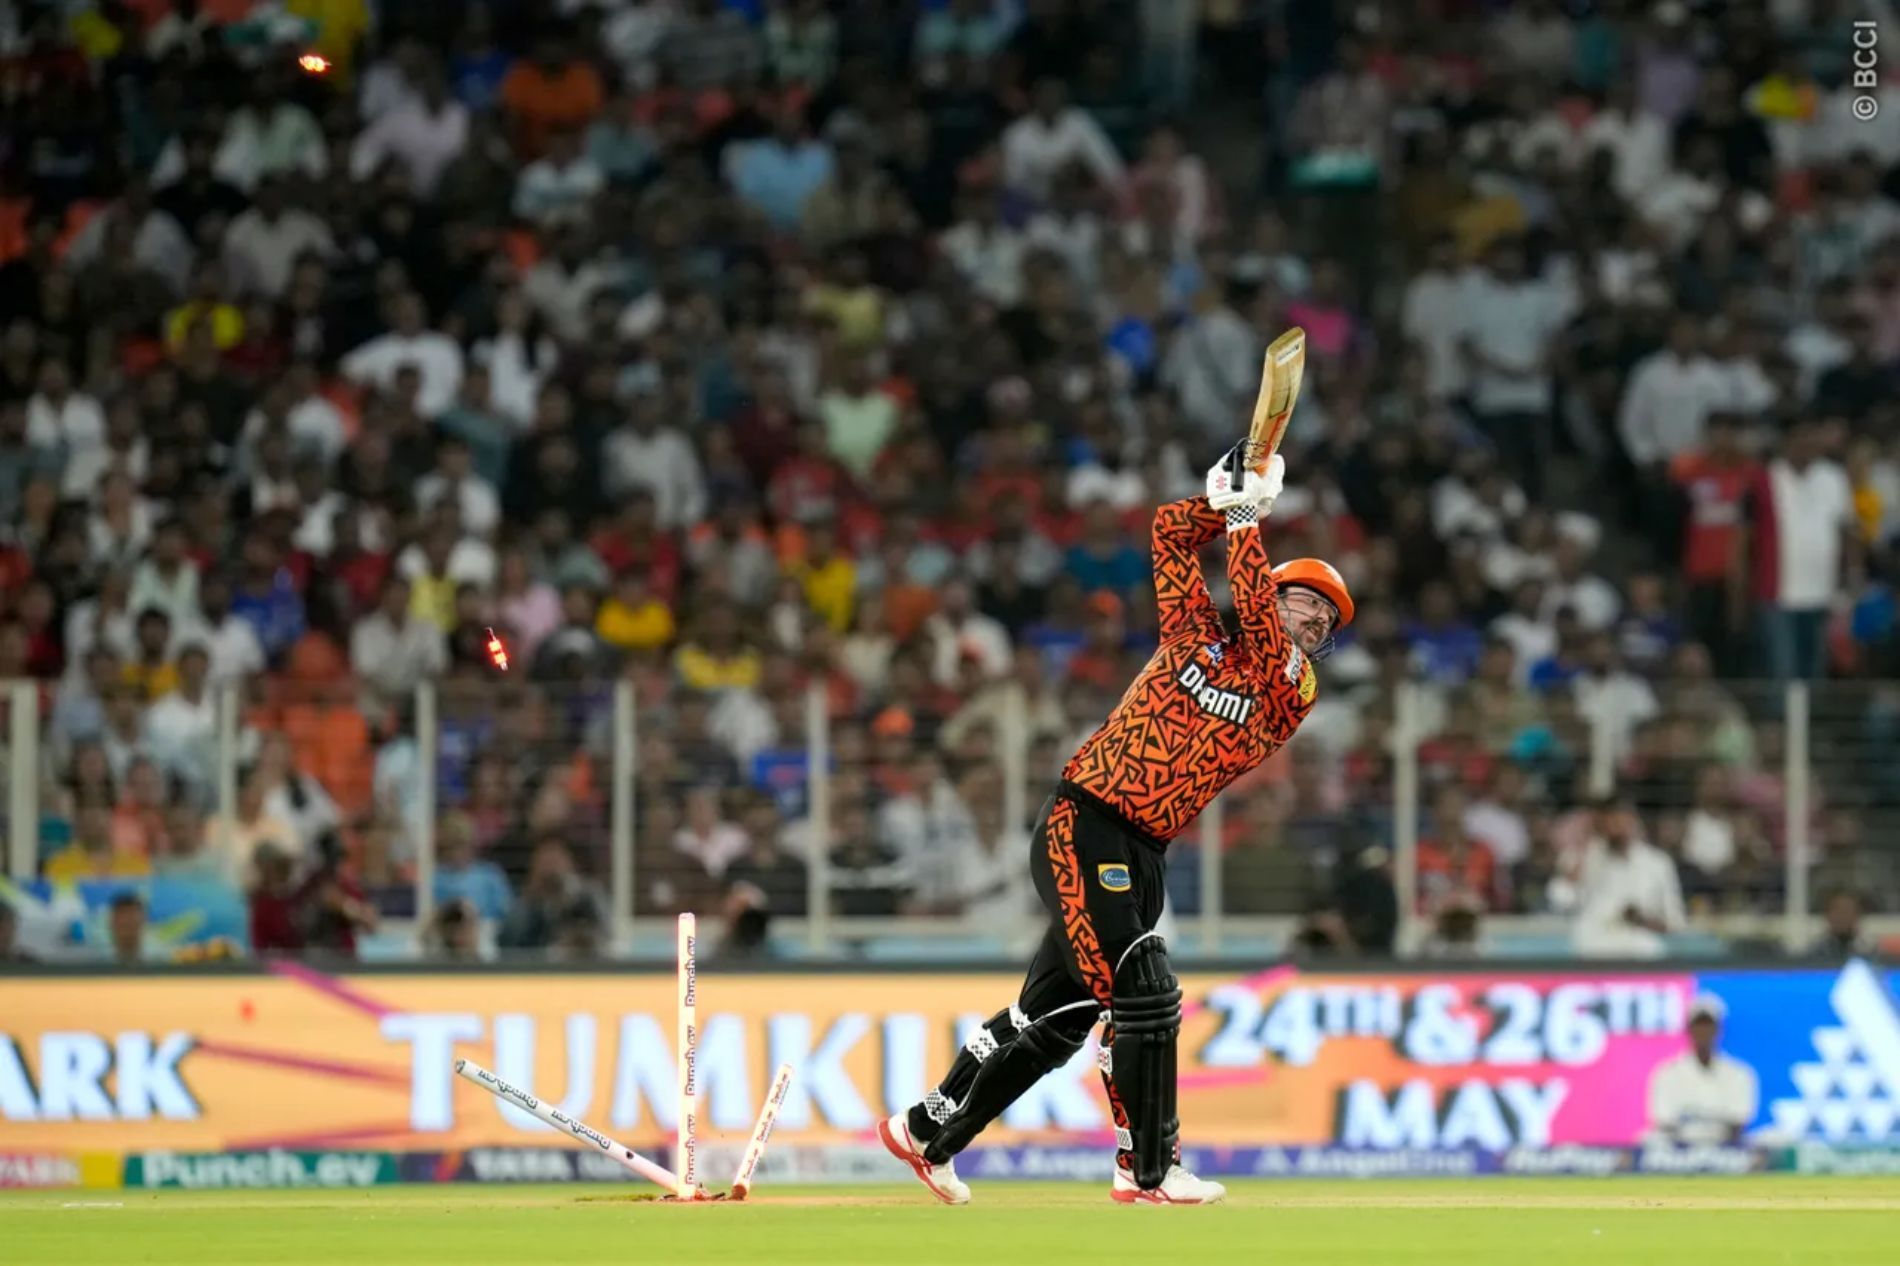 Travis Head bagged his second consecutive duck in IPL 2024. (Image Credit: BCCI/ iplt20.com)